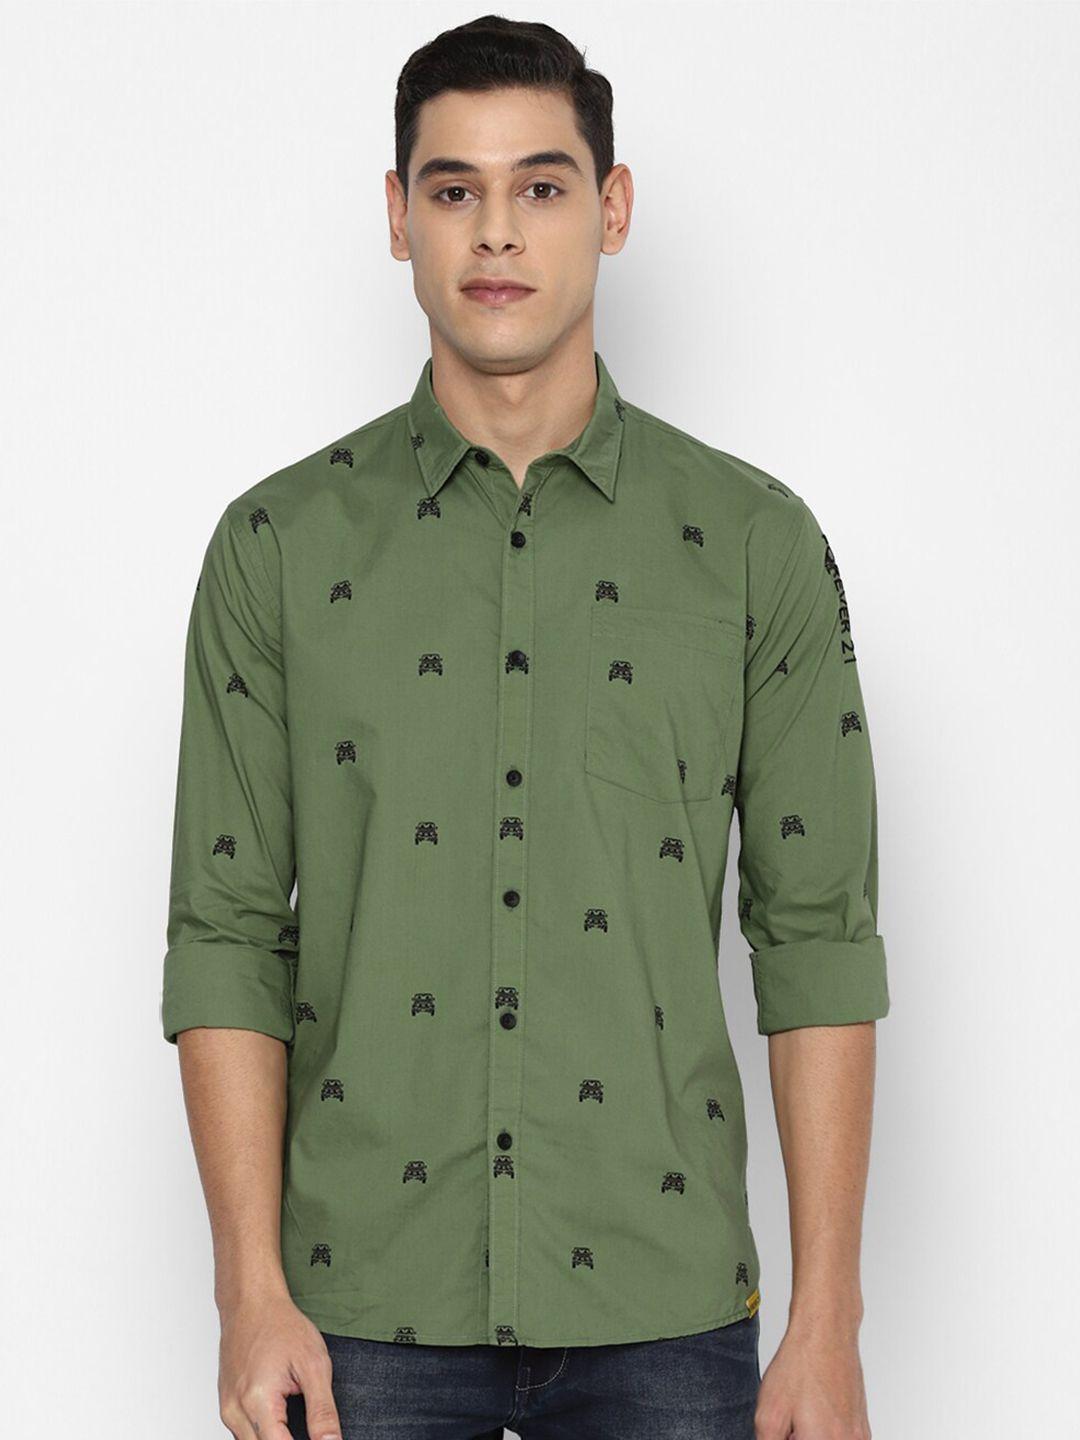 forever-21-men-green-slim-fit-opaque-printed-casual-shirt